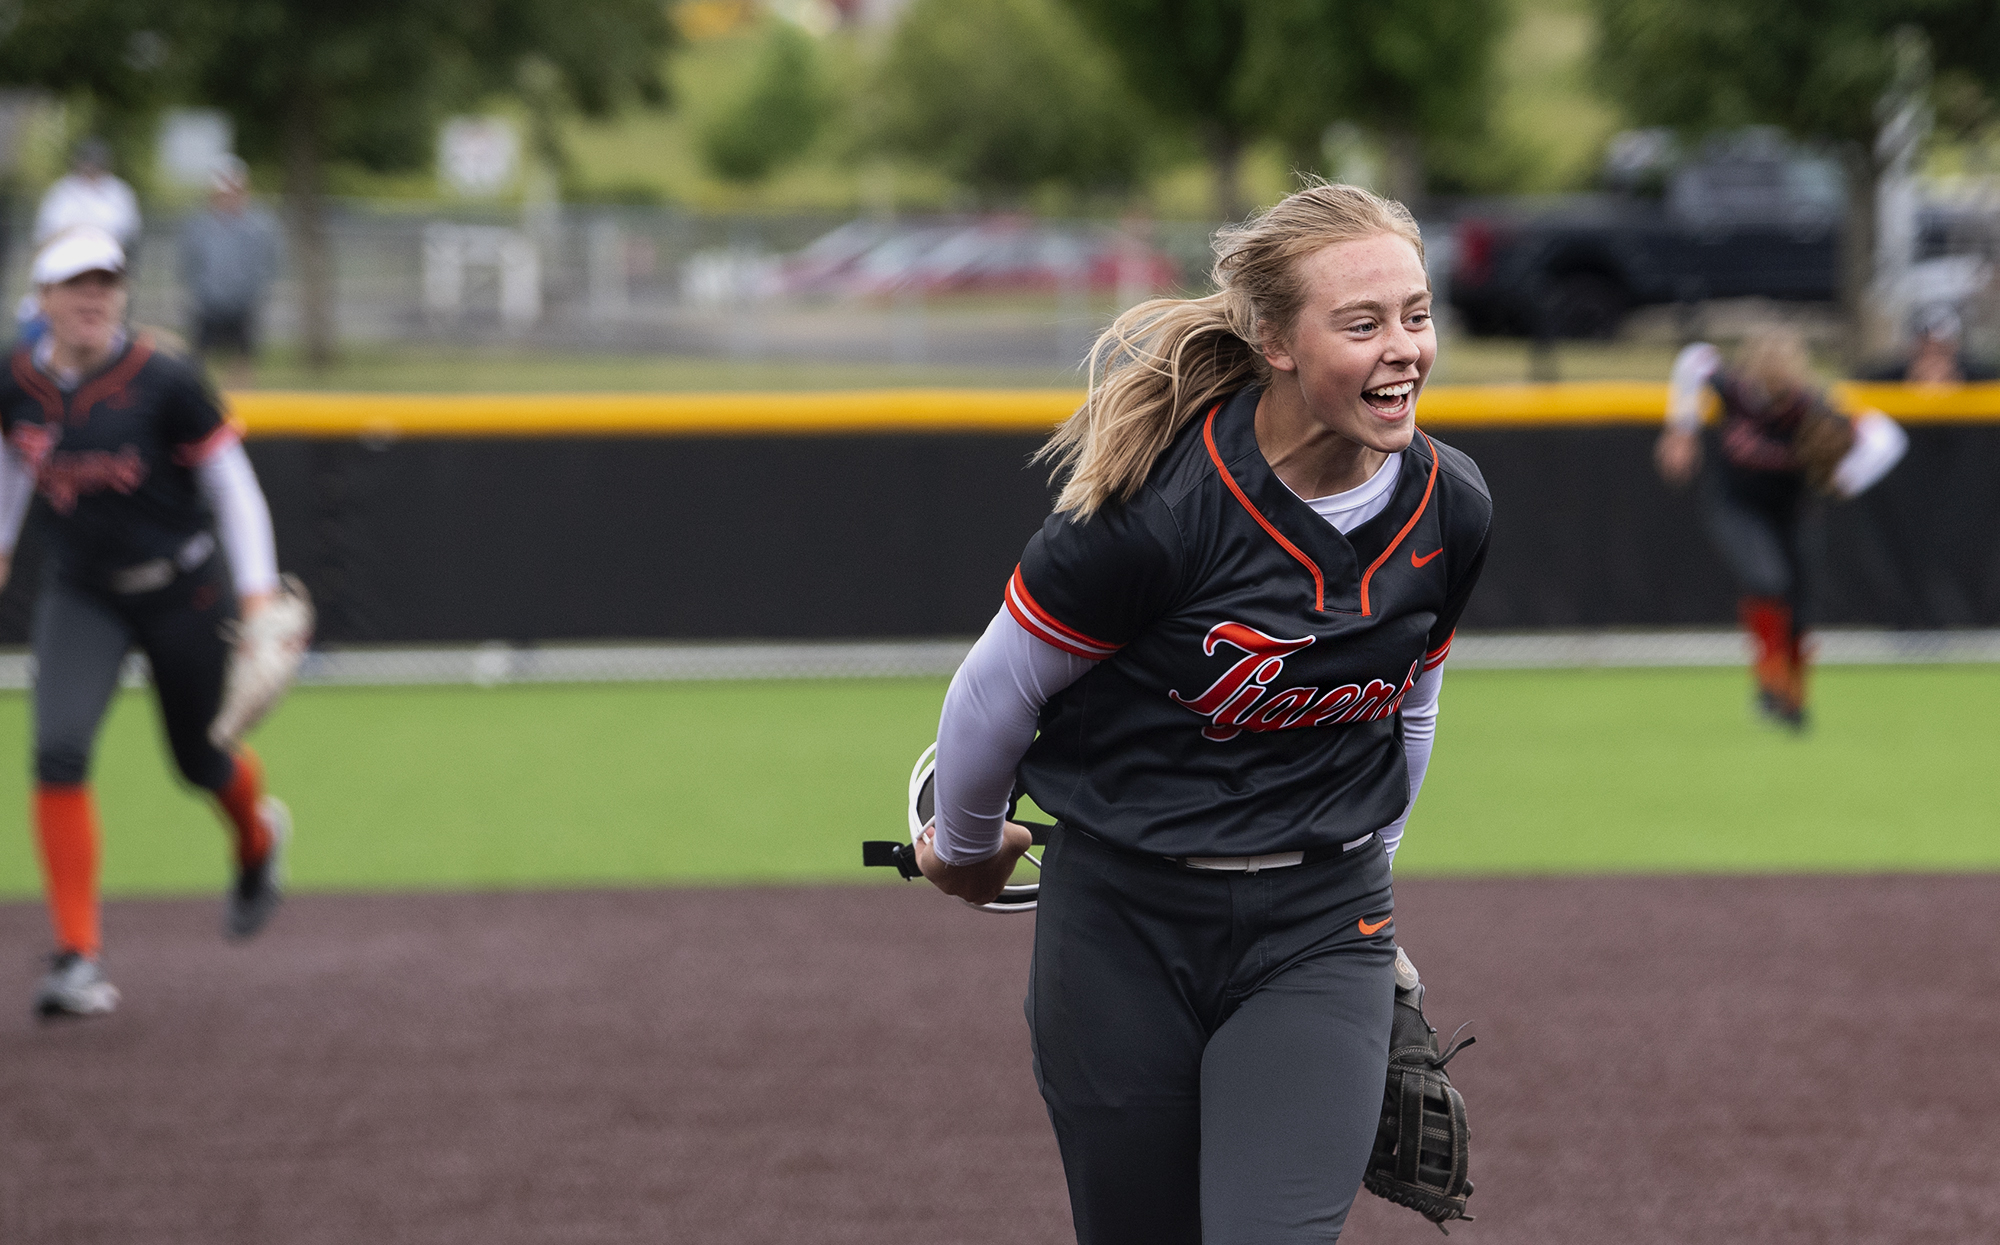 Battle Ground’s Rylee Rehbein celebrates after getting her 10th strikeout to end the game in the 4A/3A Greater St. Helens League district championship game on Saturday, June 5, 2021, at Camas High School. Battle Ground defeated Mountain View 8-0 to take the title.